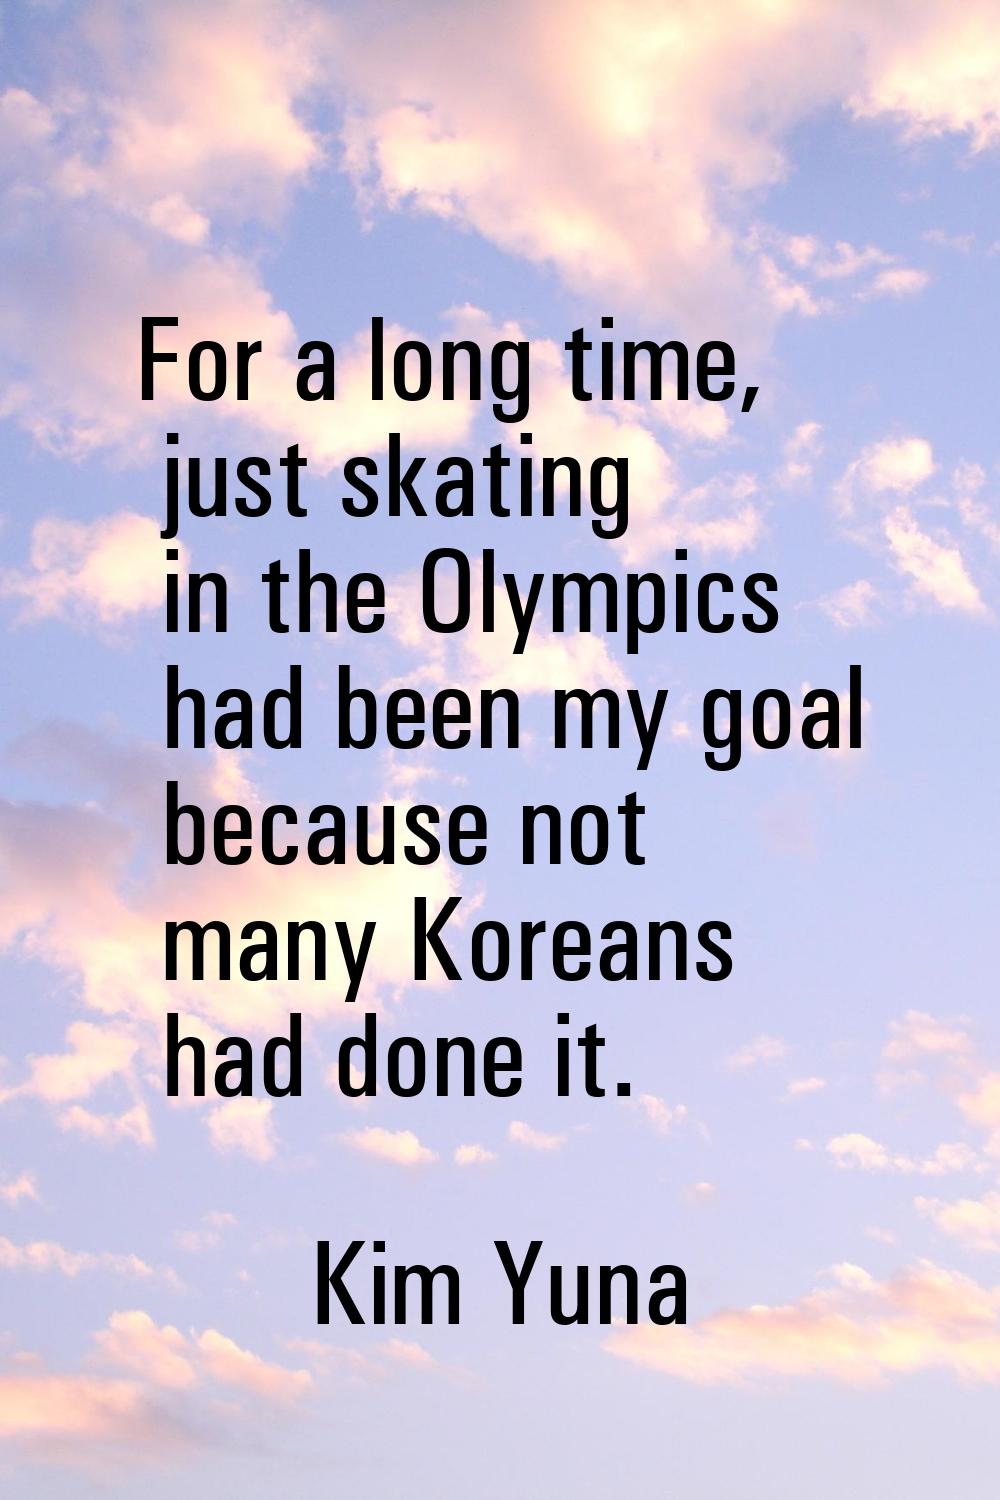 For a long time, just skating in the Olympics had been my goal because not many Koreans had done it